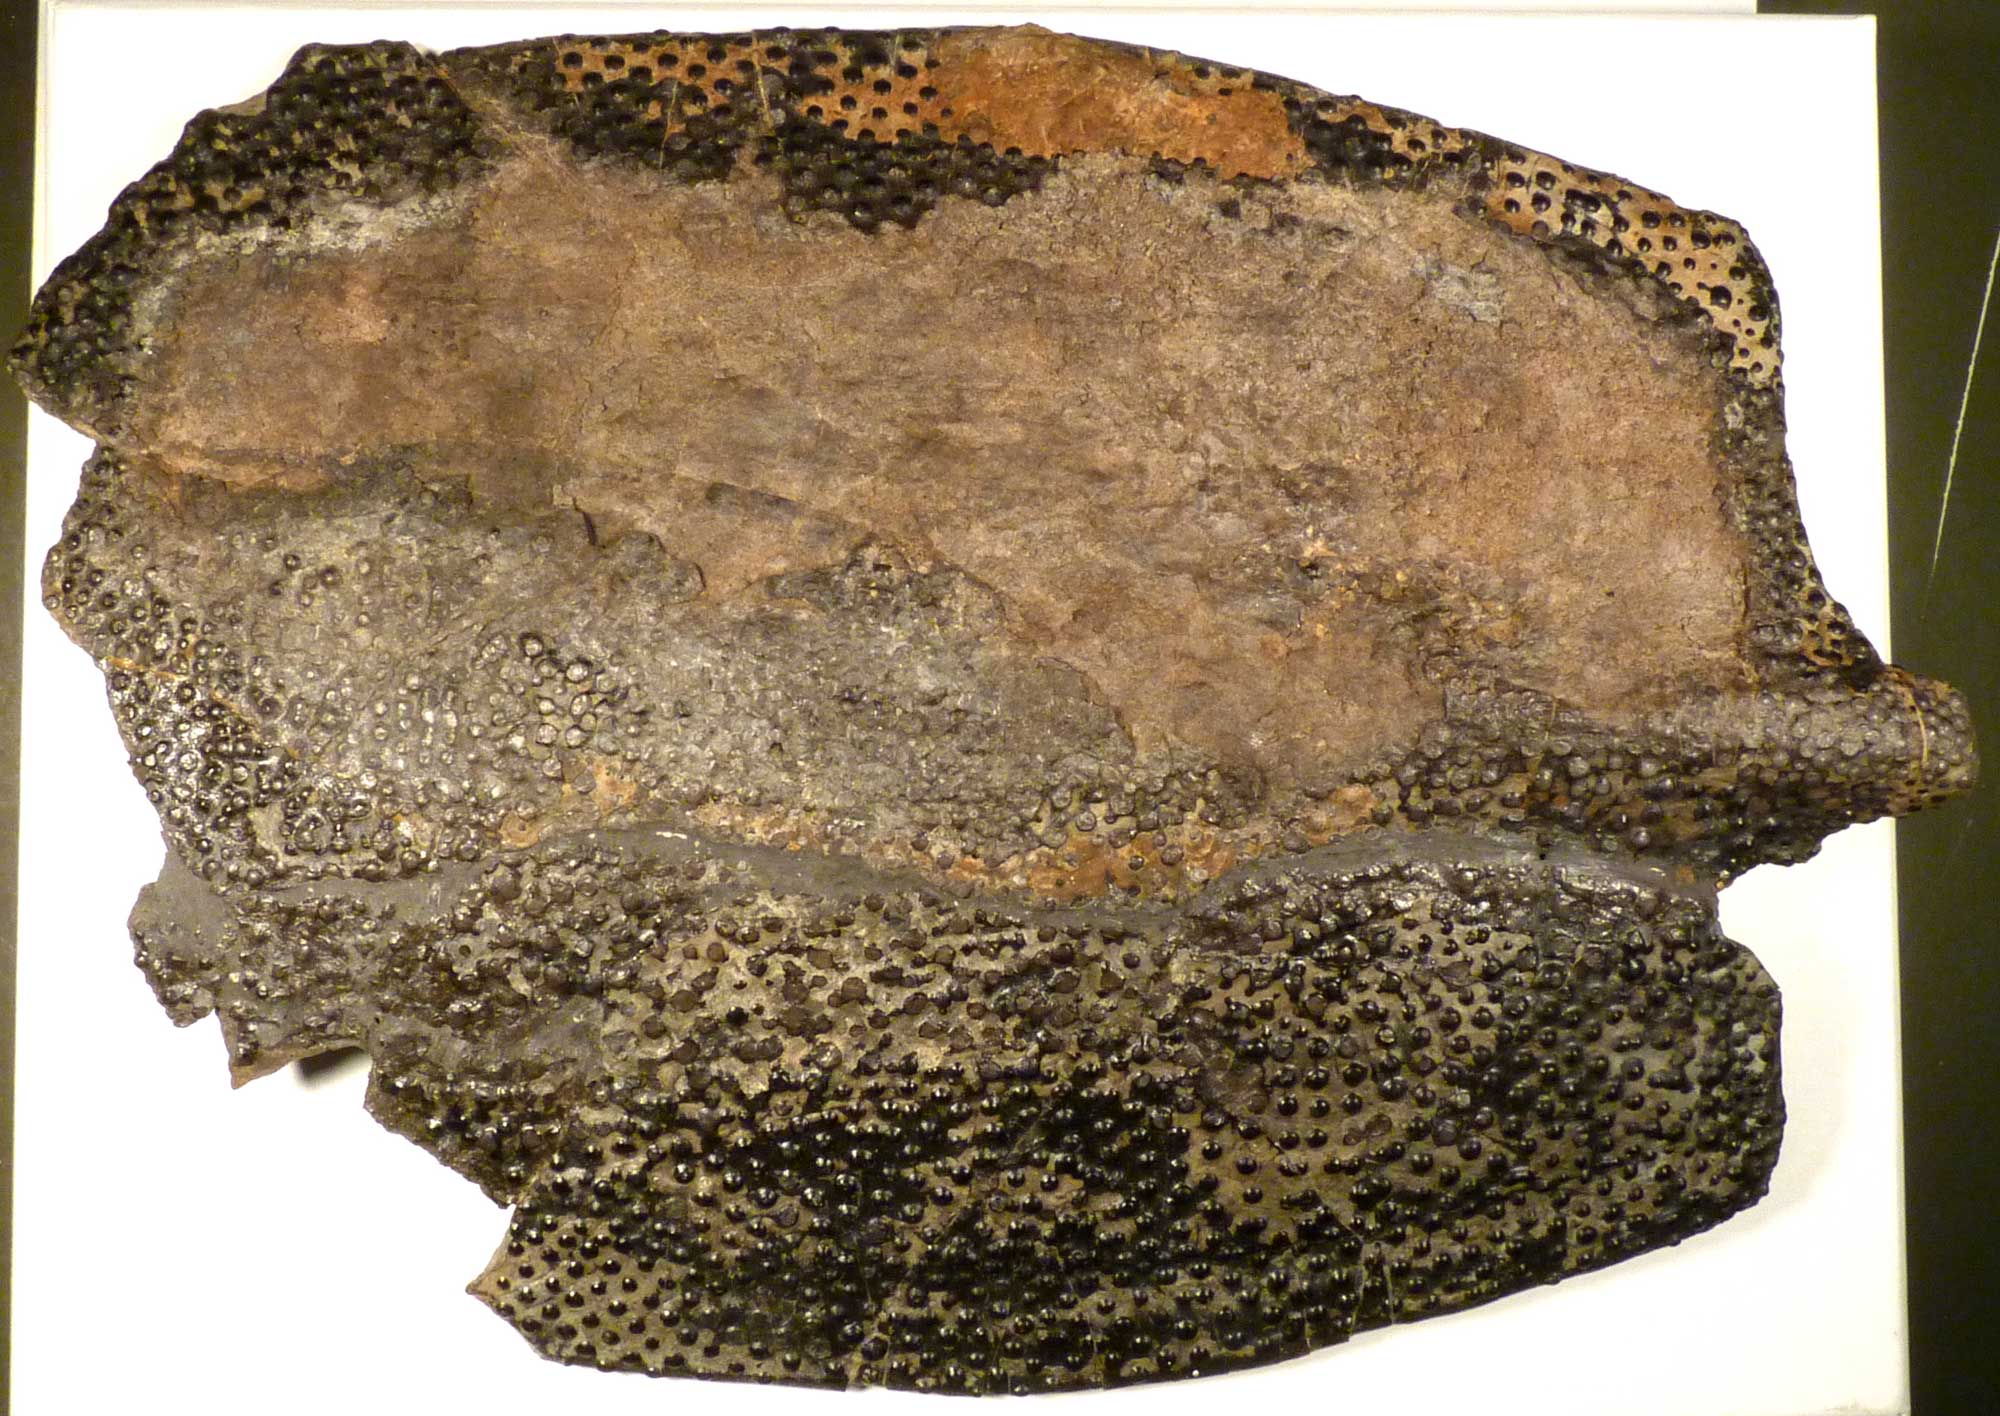 Photograph of a dermal bone from a placoderm fish from the Devonian of Ohio. The photo shows a roughly rectangular bone that is broken at the left end. The bone is dark brown in color and its surface is pebbly.